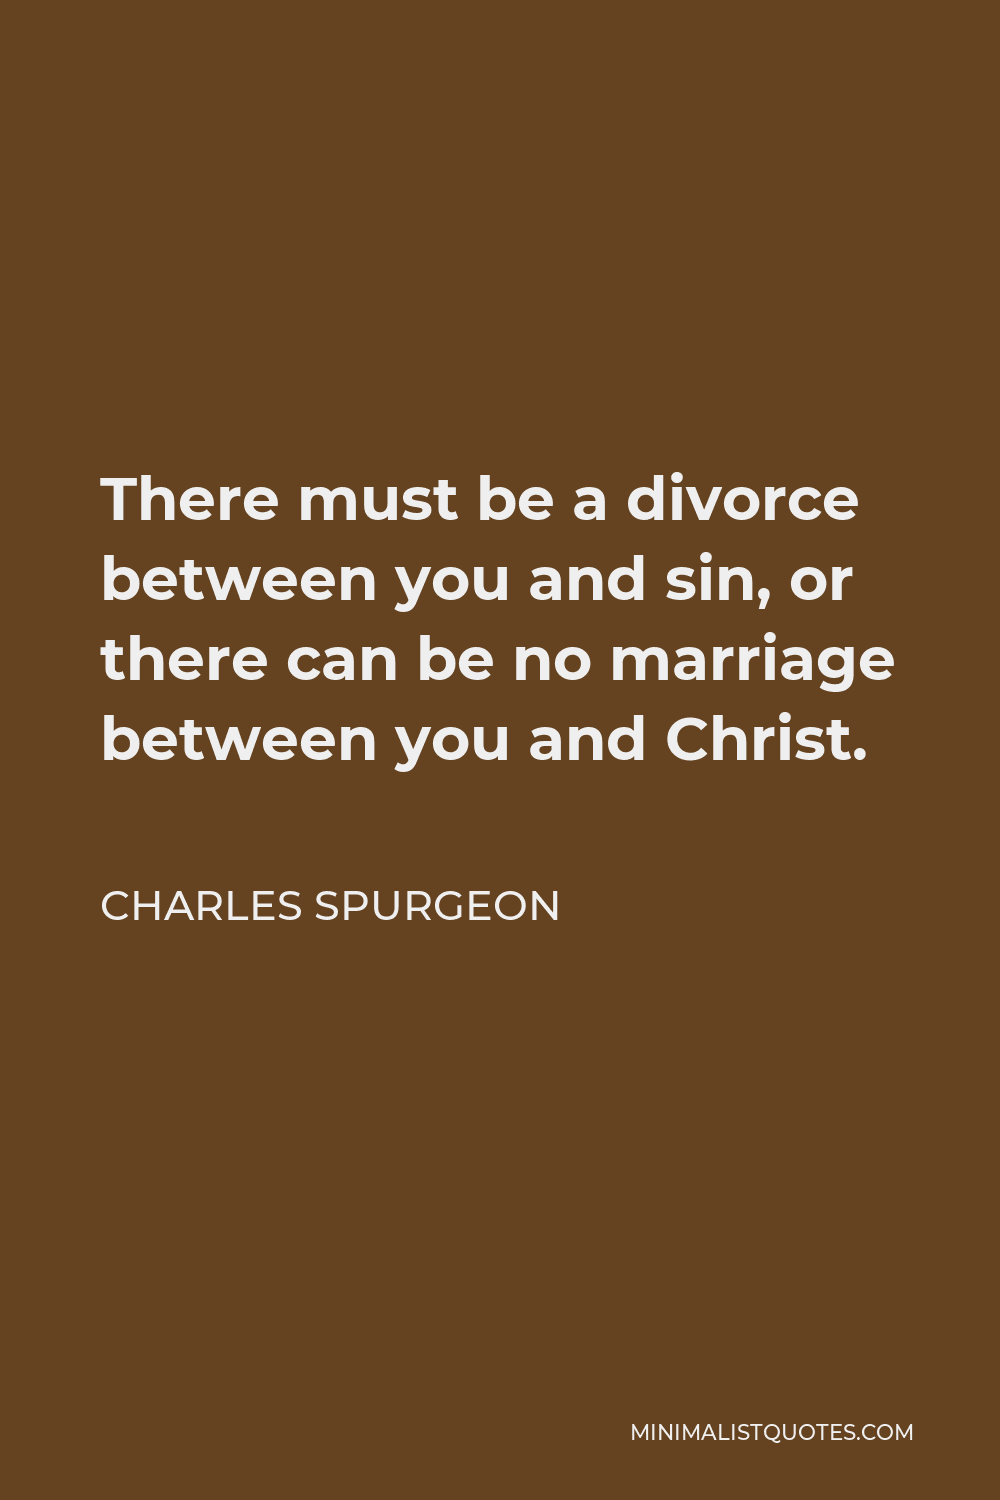 Charles Spurgeon Quote - There must be a divorce between you and sin, or there can be no marriage between you and Christ.